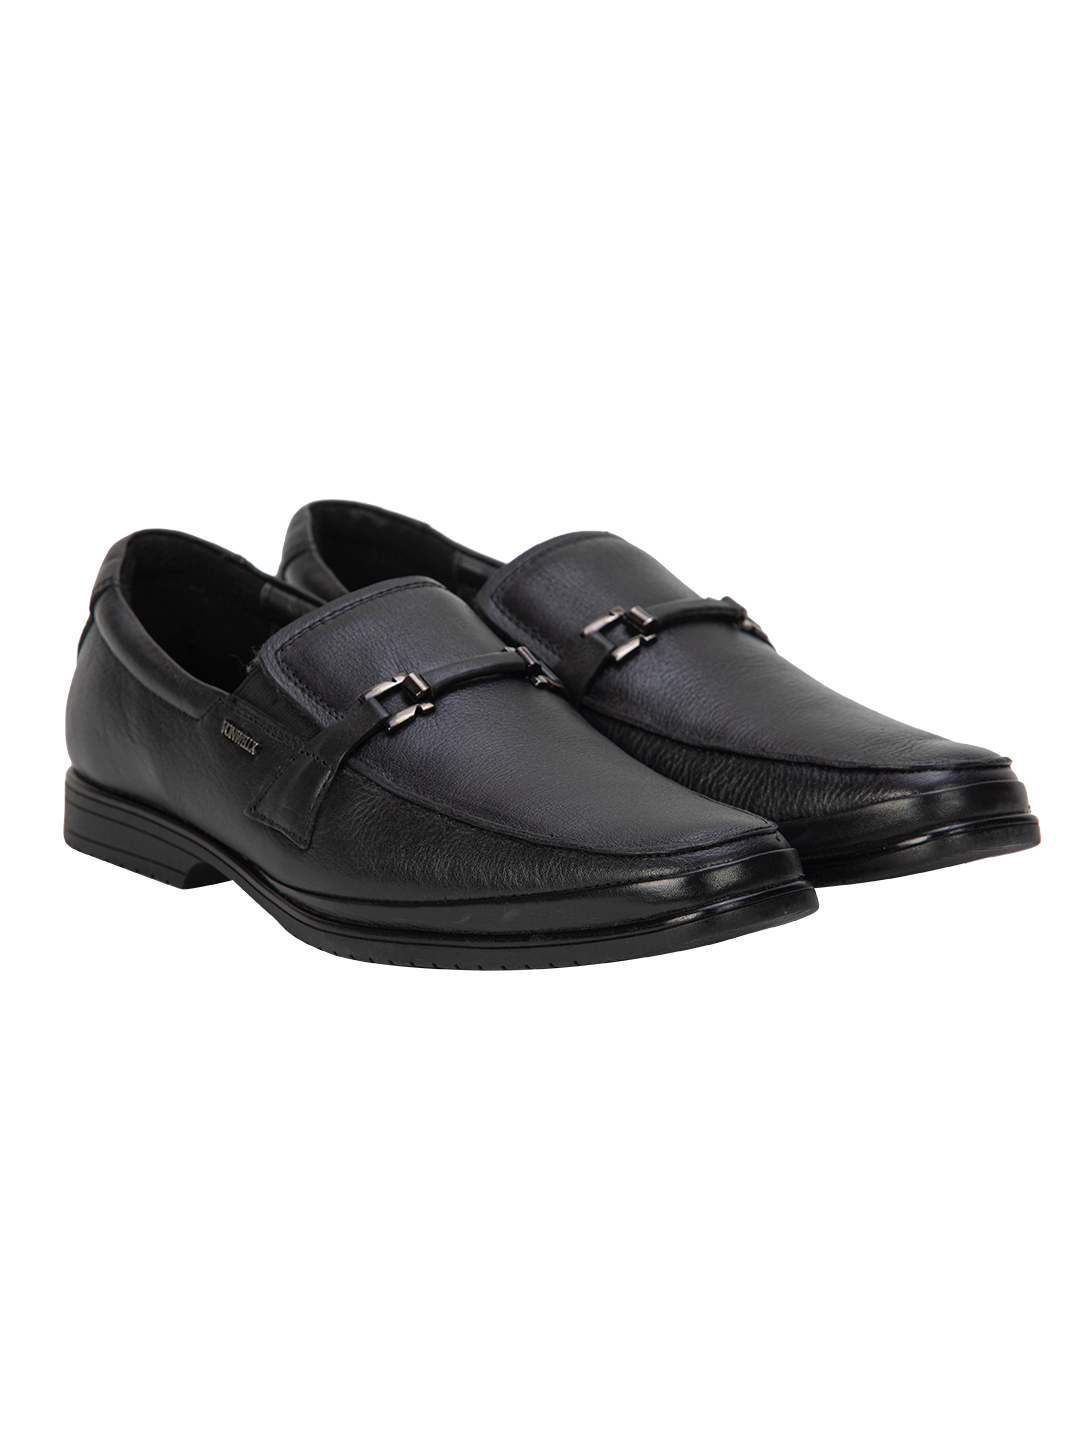 Buy Von Wellx Germany Comfort Black Jace Shoes Online in Ahmedabad